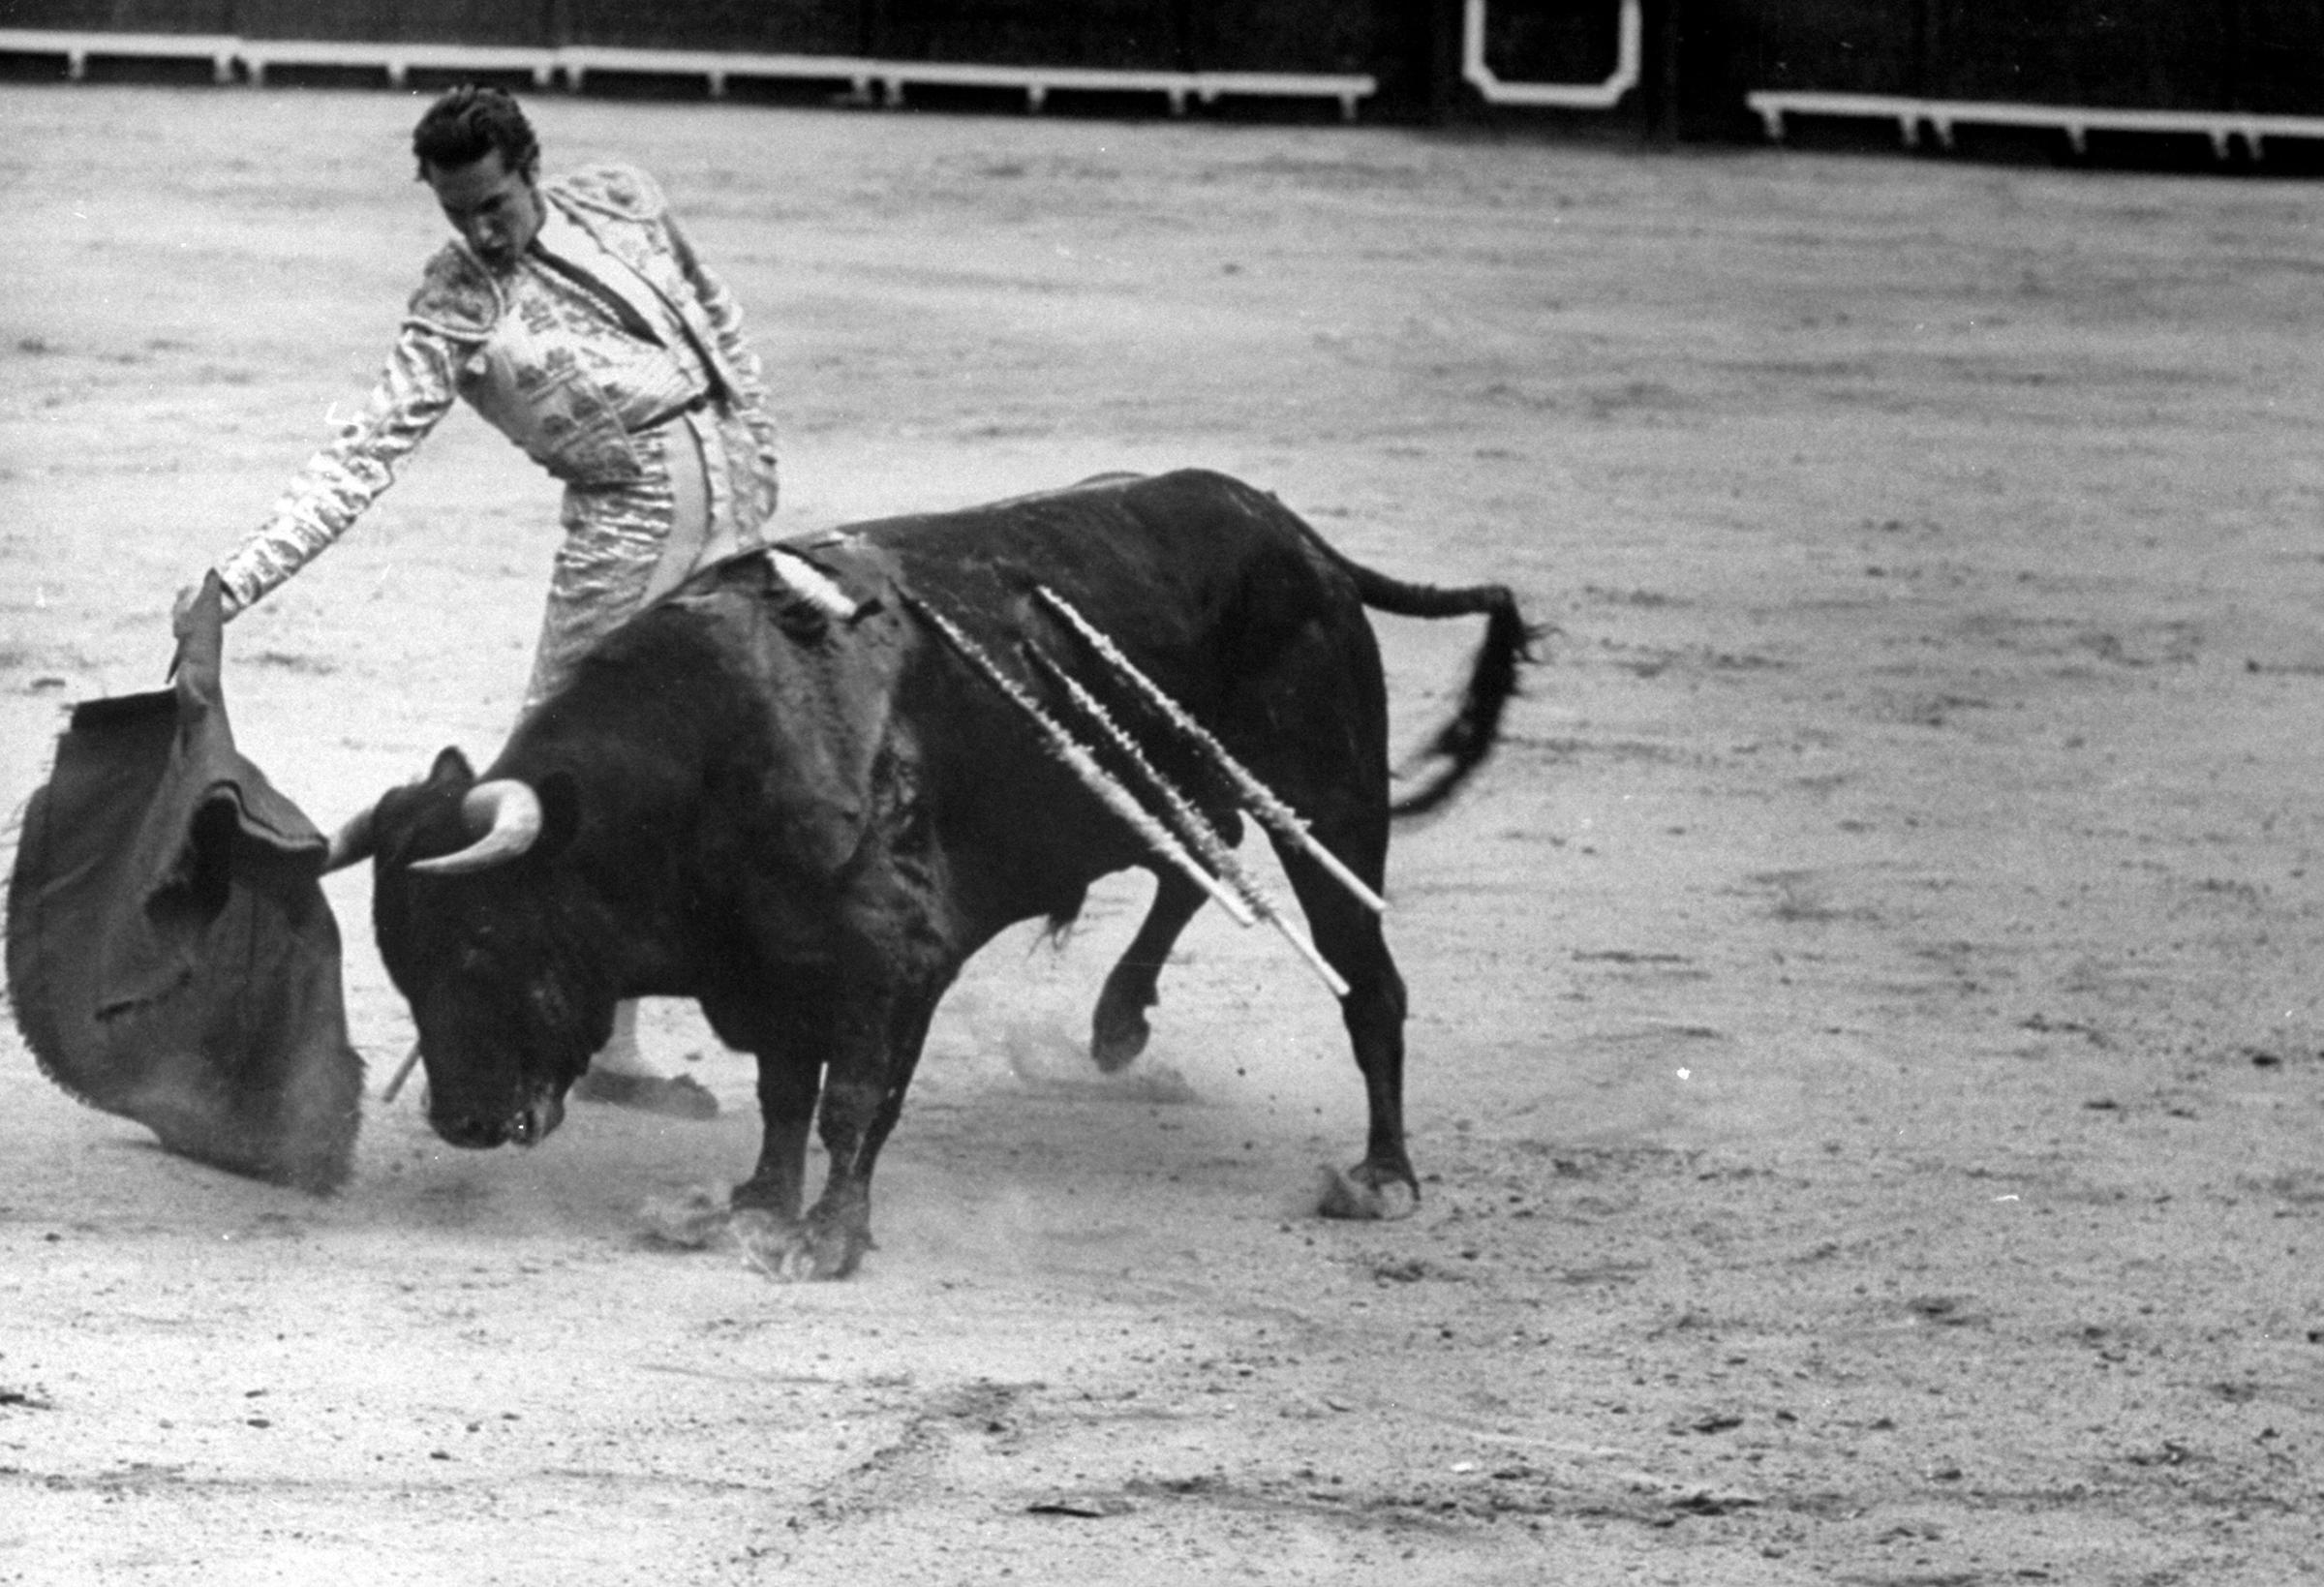 Matador and bull in the ring for a bullfight during the festival of San Fermín.